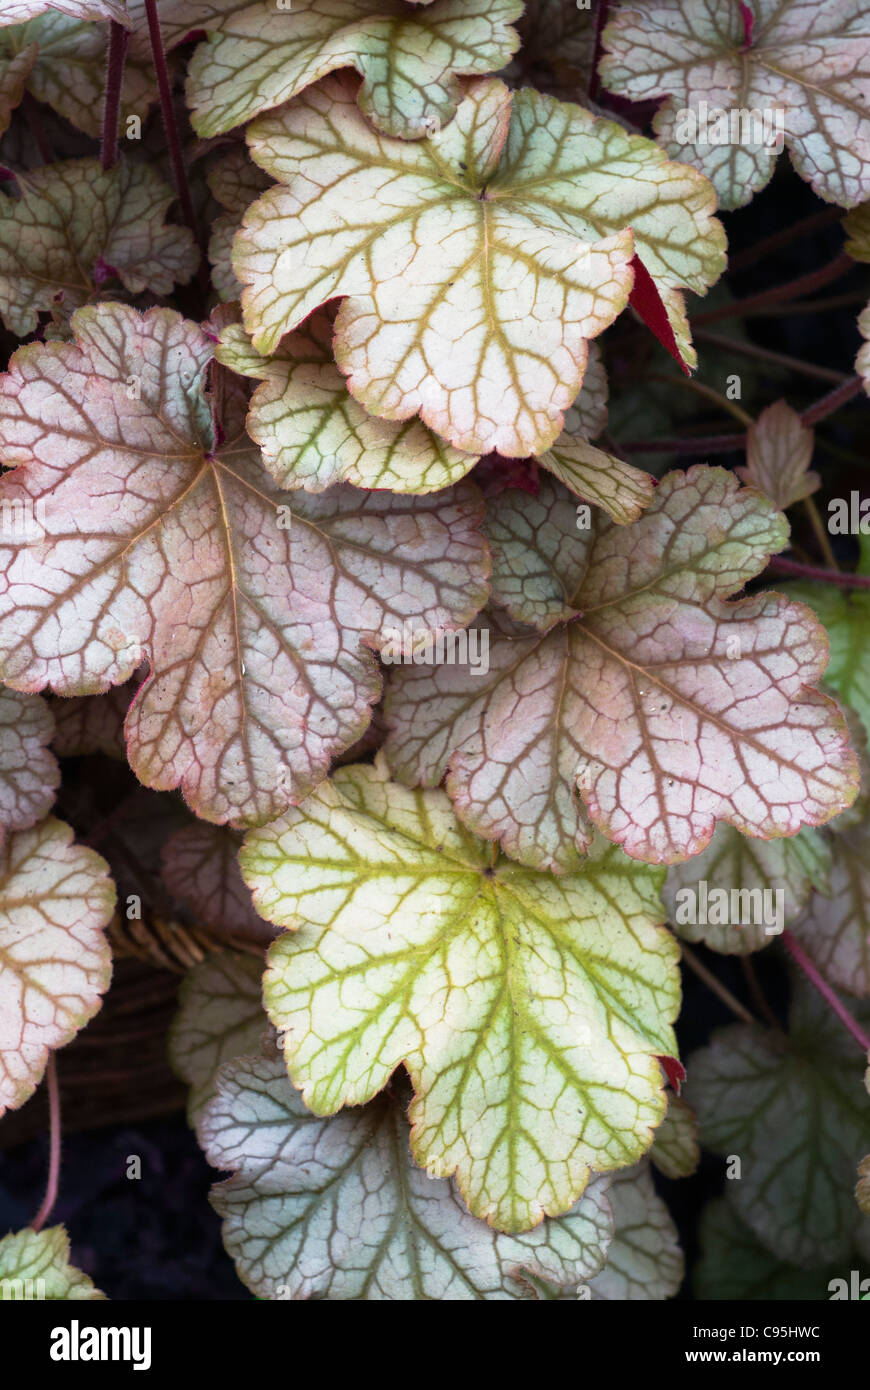 Heuchera ‘Pinot Noir’ perennial foliage plant with changeable colored leaf colors and prominent veins for shade garden Stock Photo